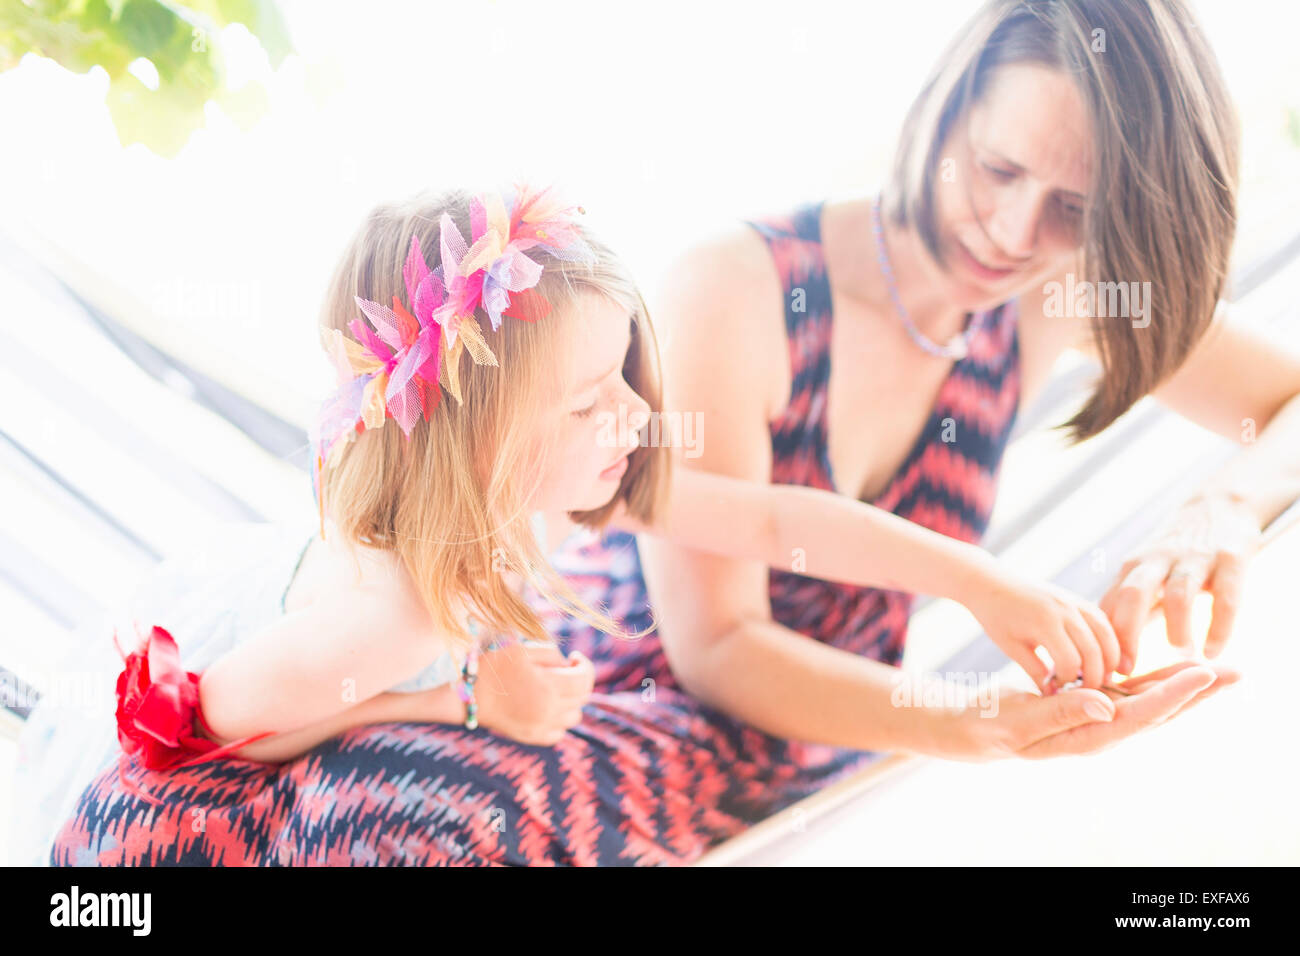 Mother and daughter playing together Stock Photo